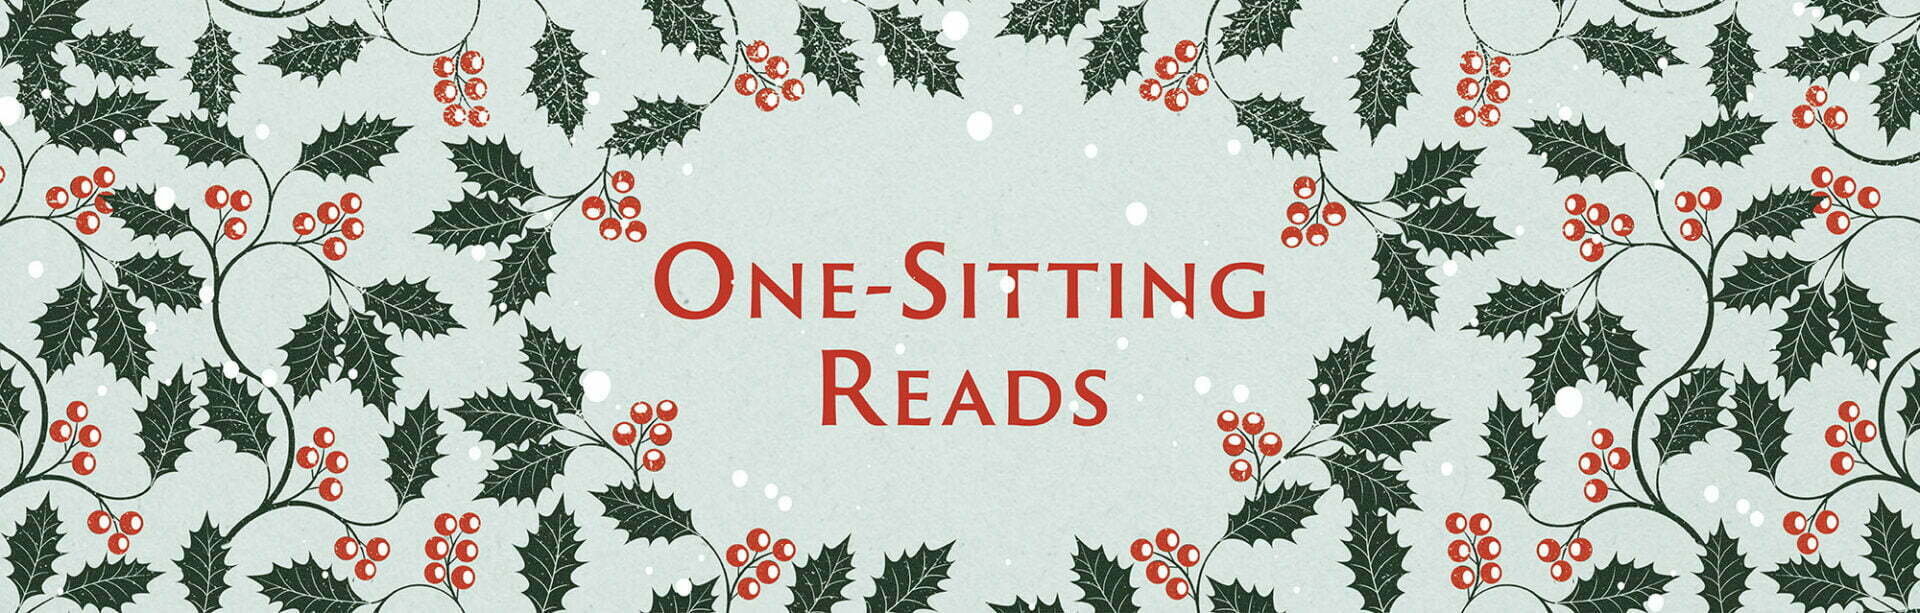 https://faber.wp.dev.diffusion.digital/wp-content/uploads/2021/11/Faber-Christmas-Gift-Guide-One-Sitting-Reads-1920x613.jpg